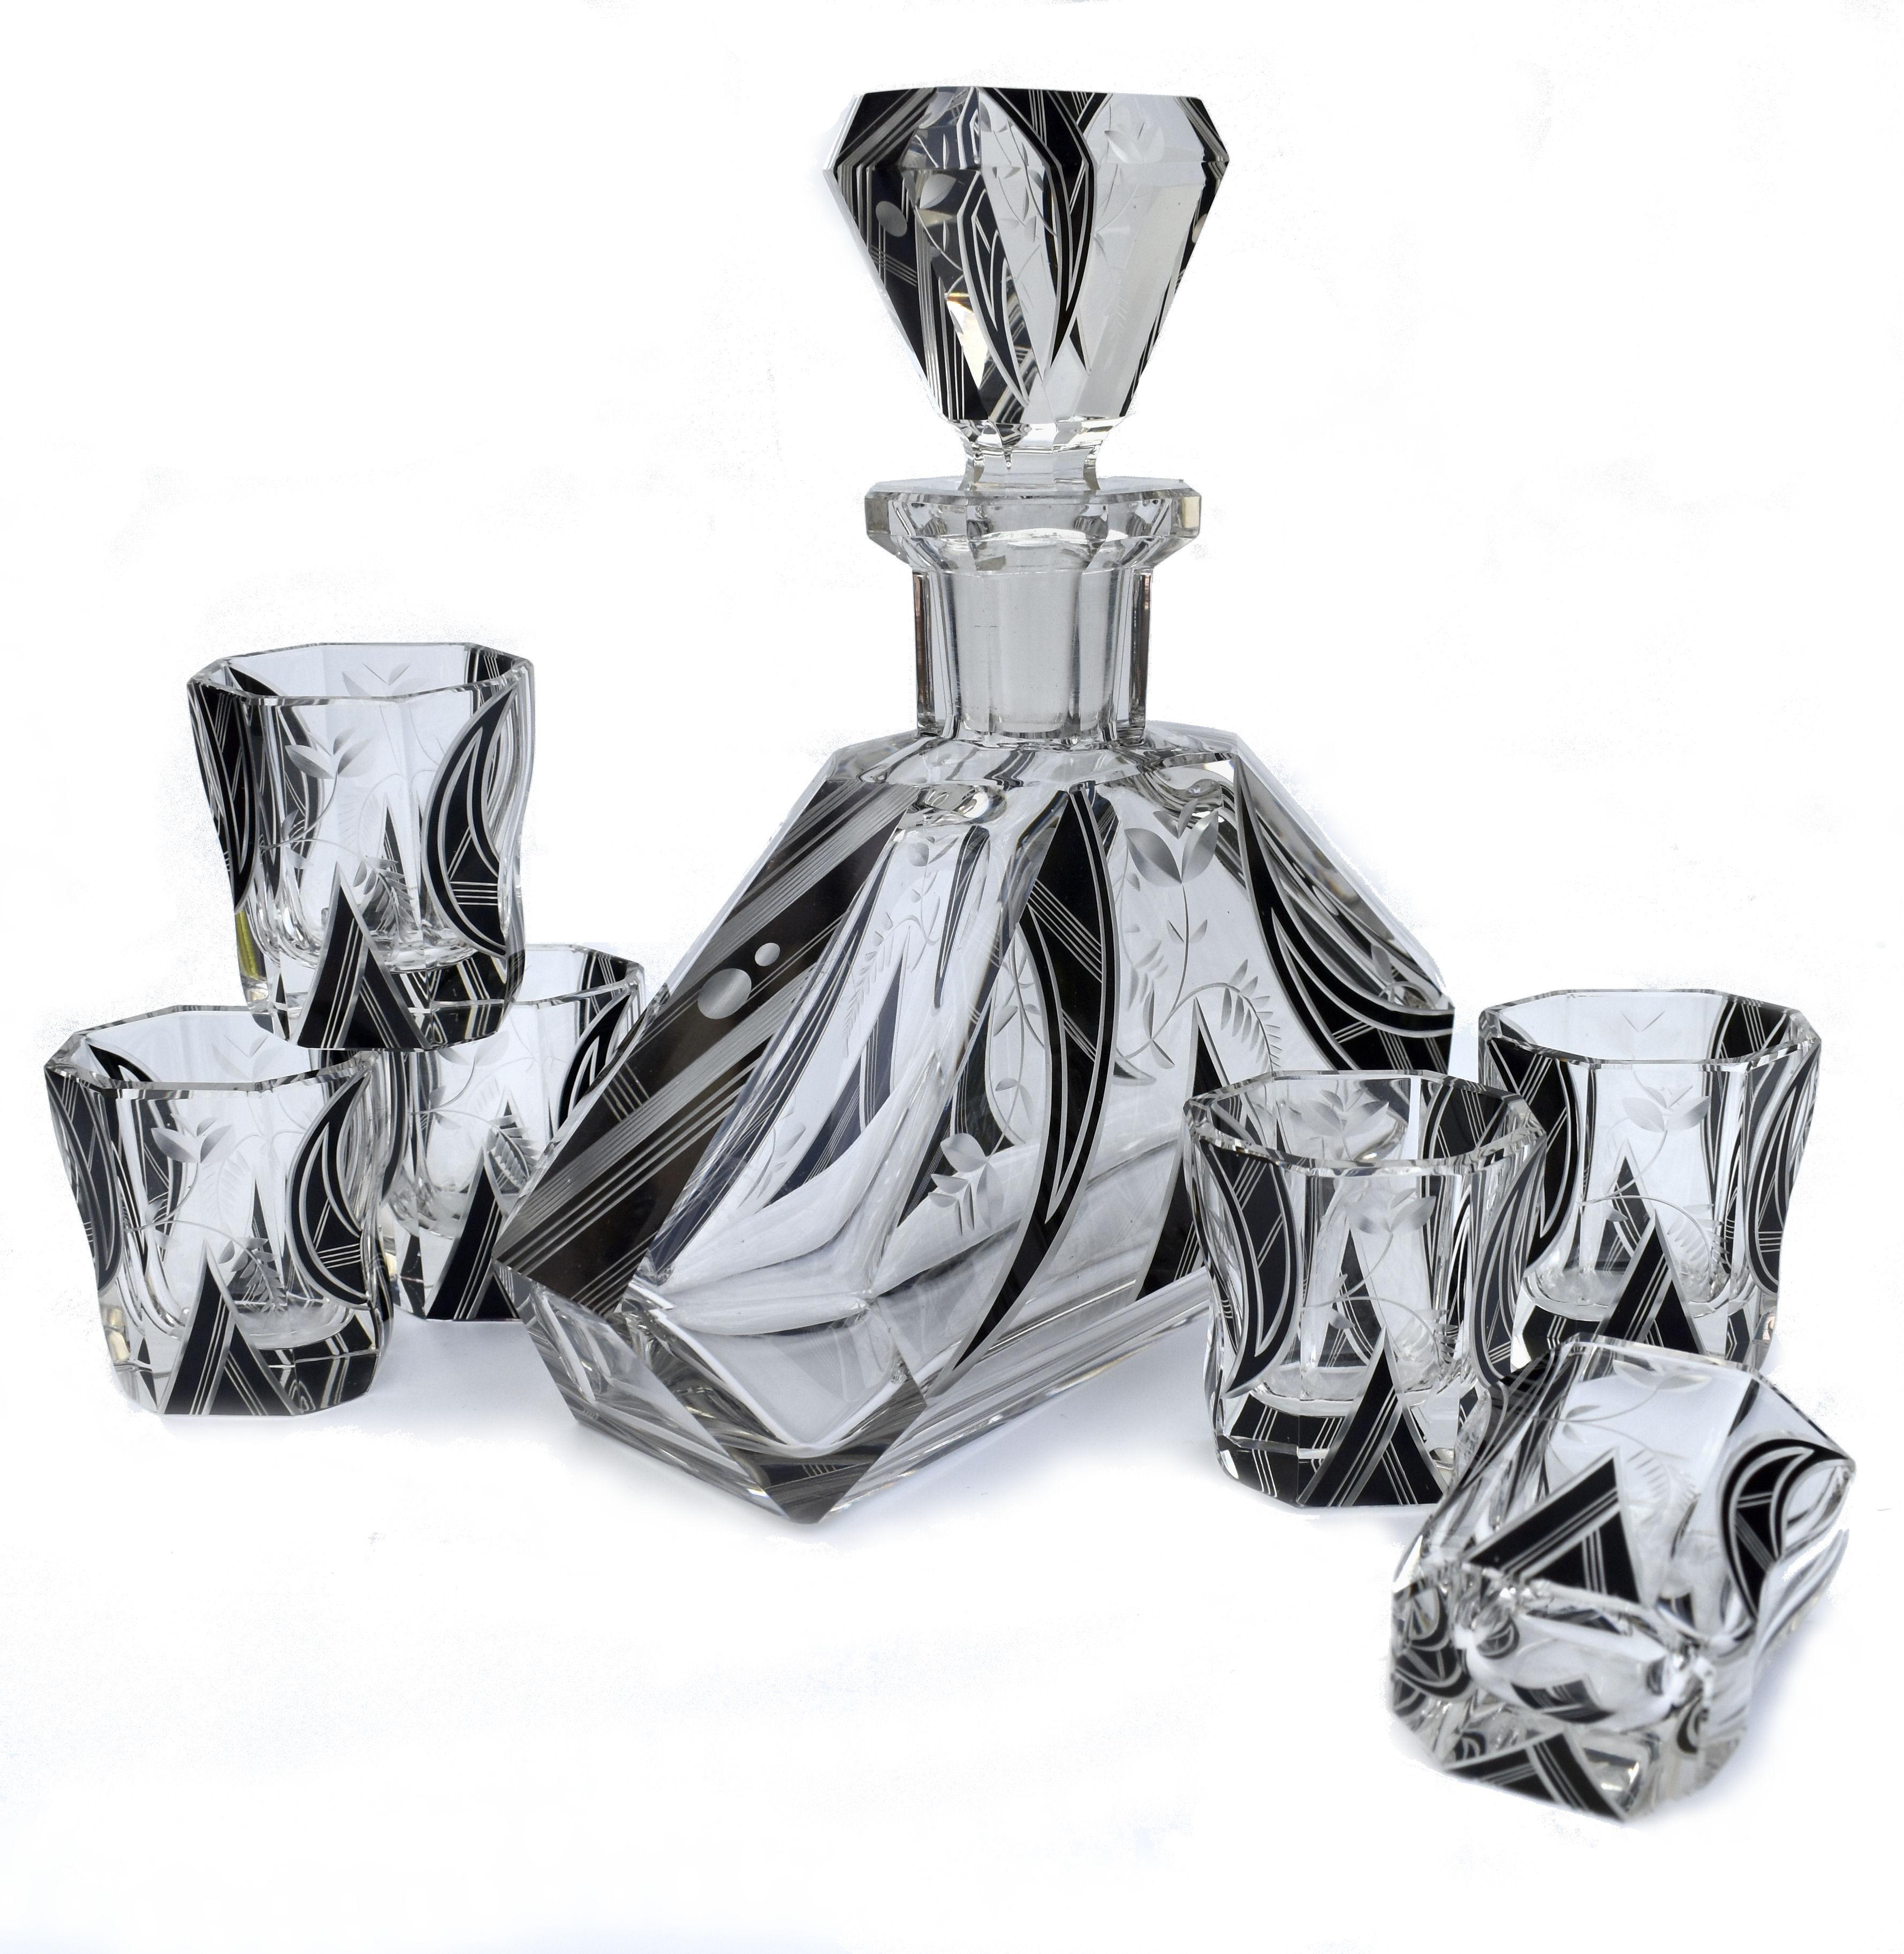 Enameled Art Deco Karl Palda Glass Decanter Set with 6 Matching Glasses, circa 1930 For Sale